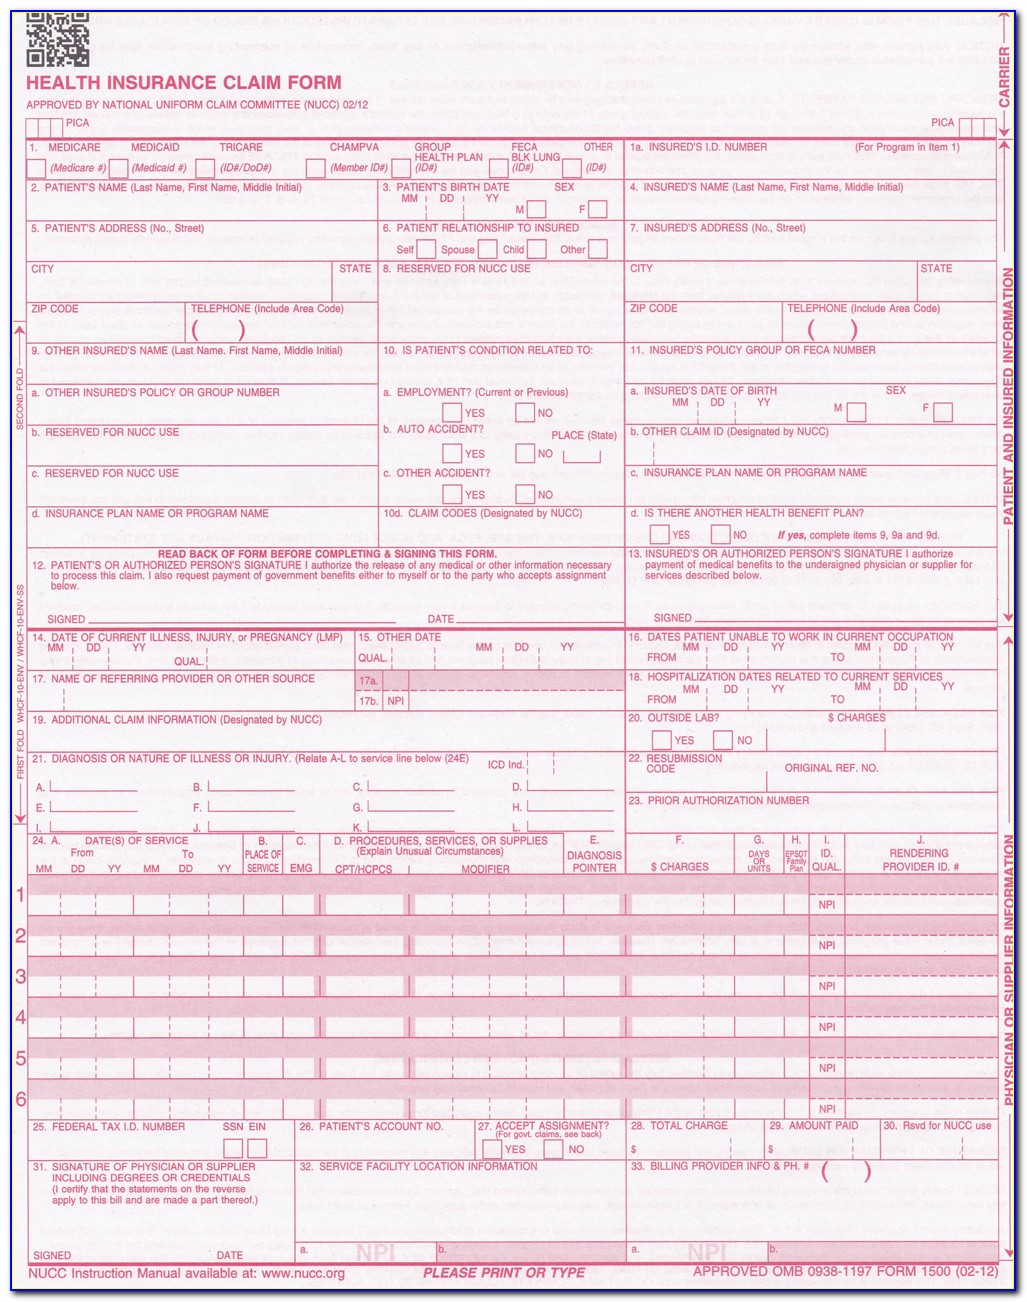 Cms 1500 Form Word Template